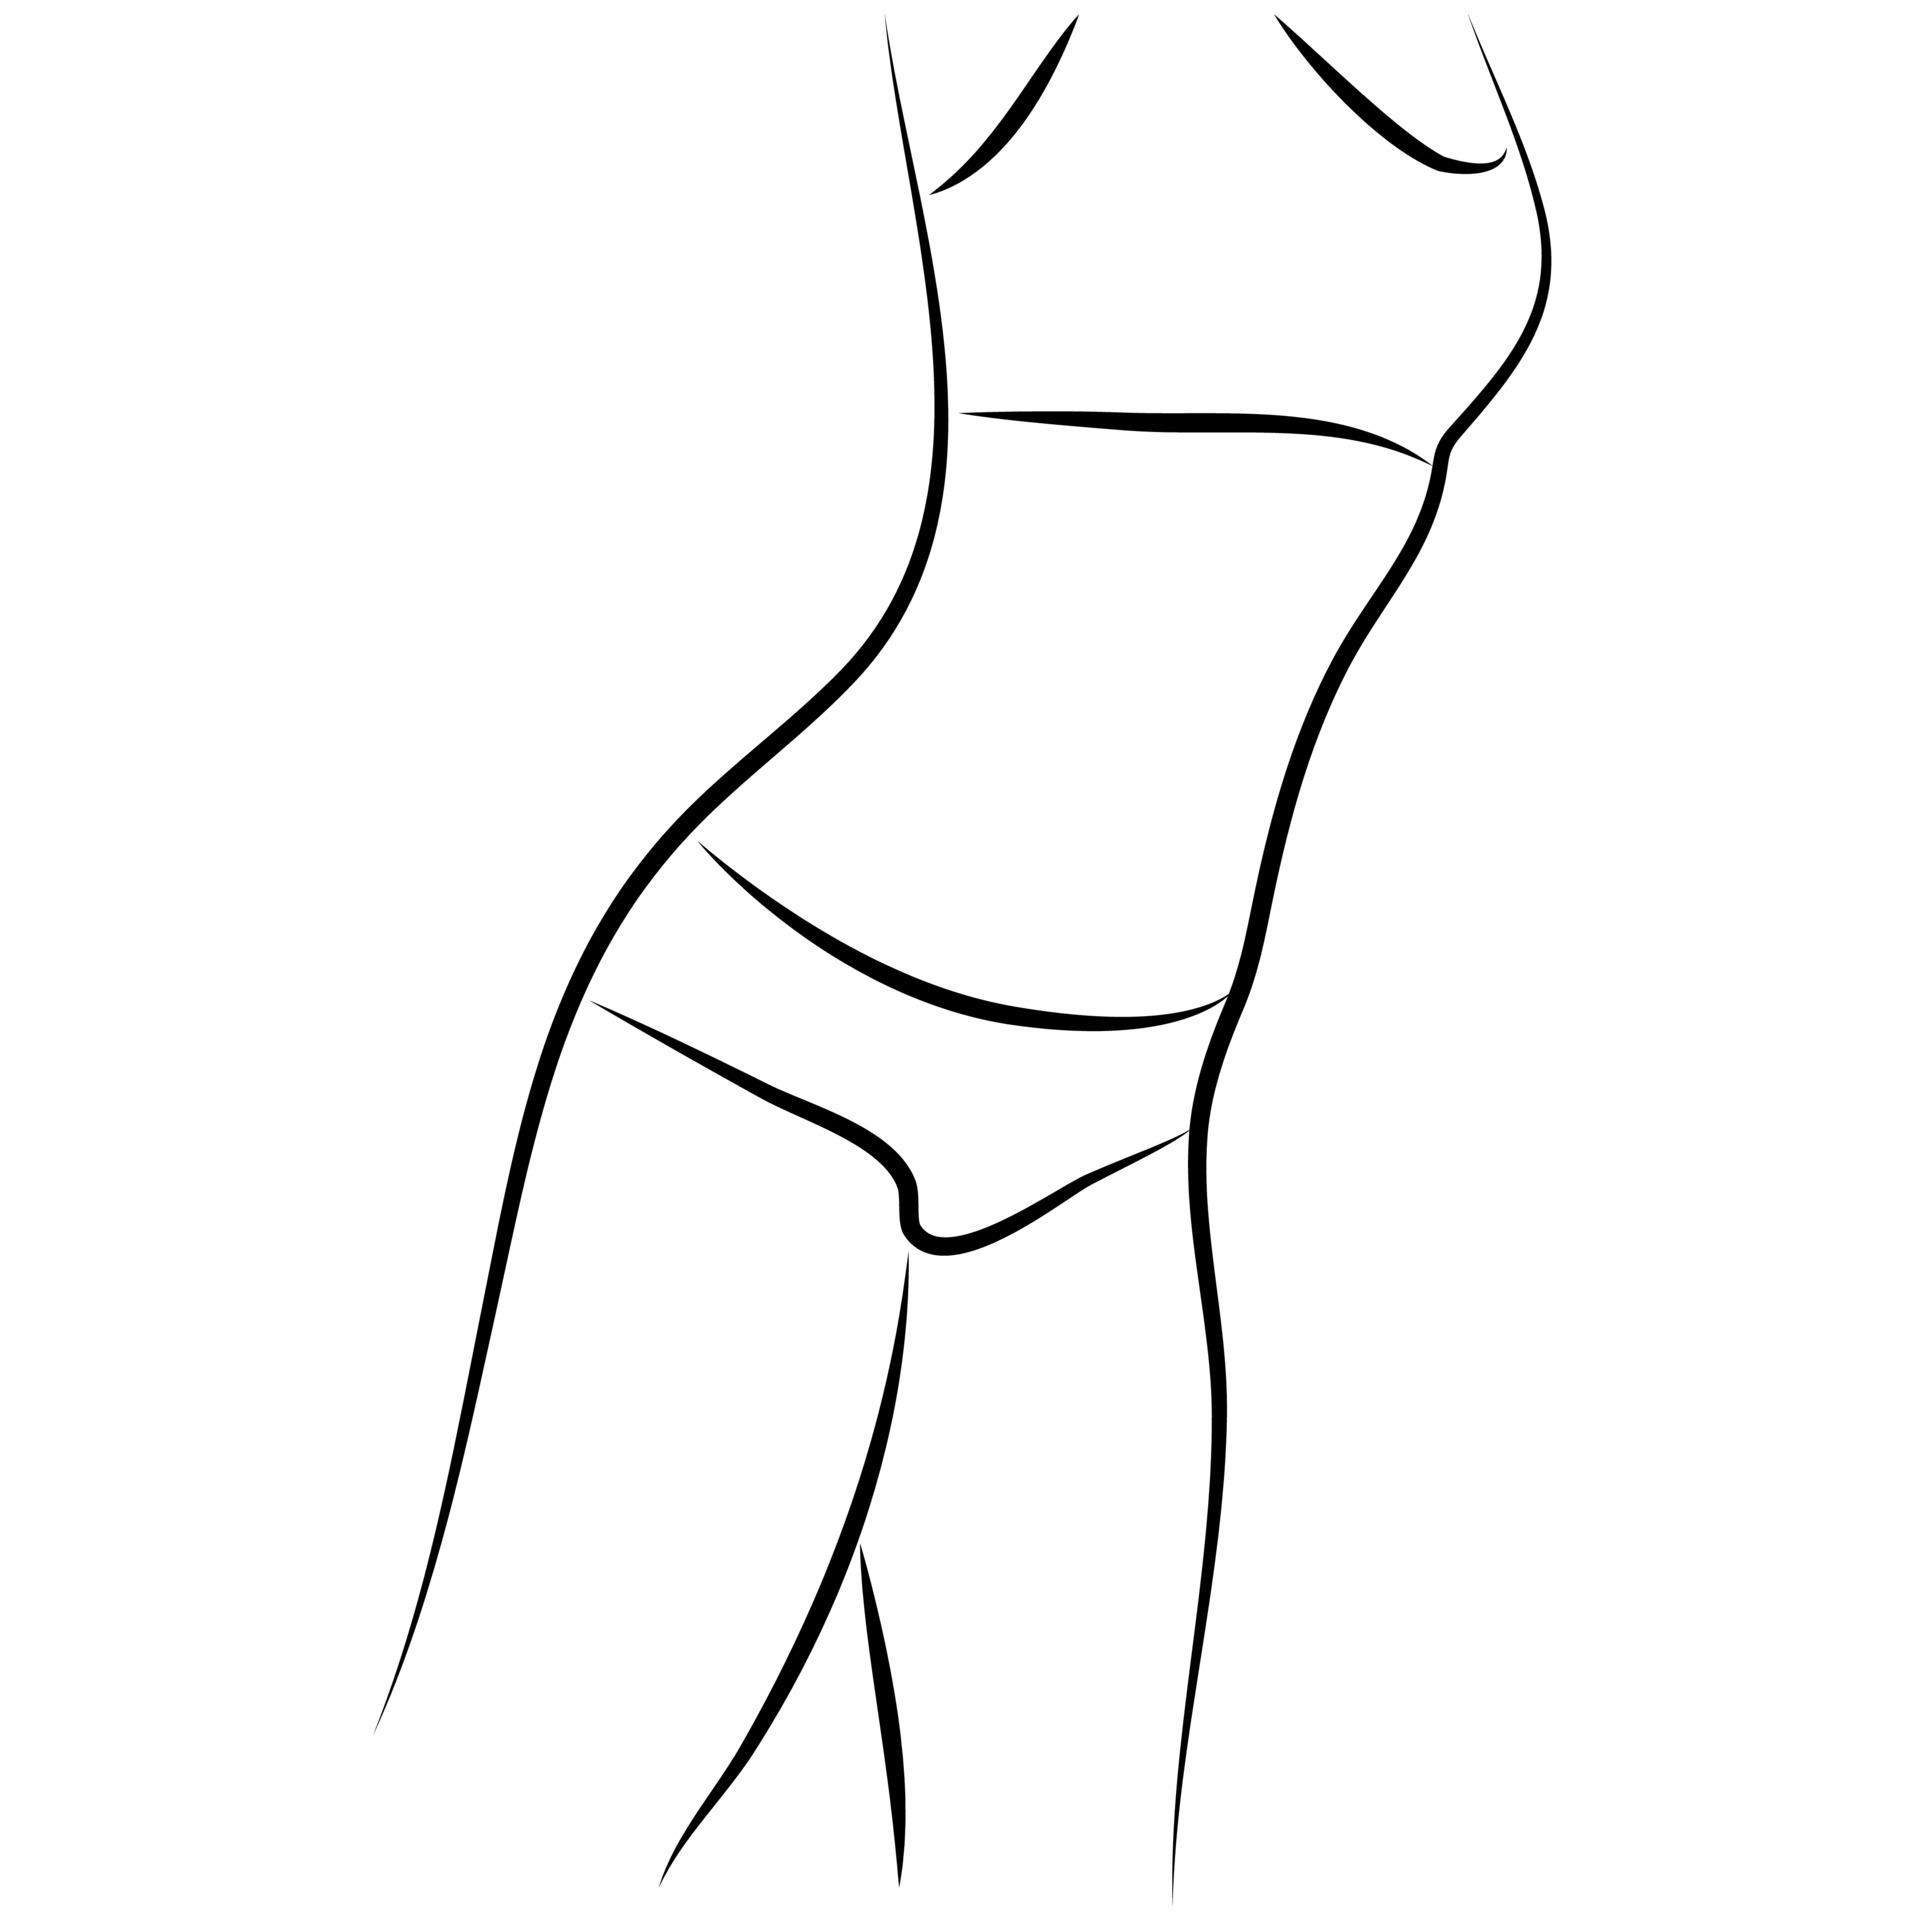 https://static.vecteezy.com/system/resources/previews/004/532/871/original/abstract-minimalist-female-figure-in-underwear-fashion-illustration-of-a-woman-s-body-in-modern-linear-style-elegant-art-for-posters-tattoos-underwear-shop-logos-vector.jpg